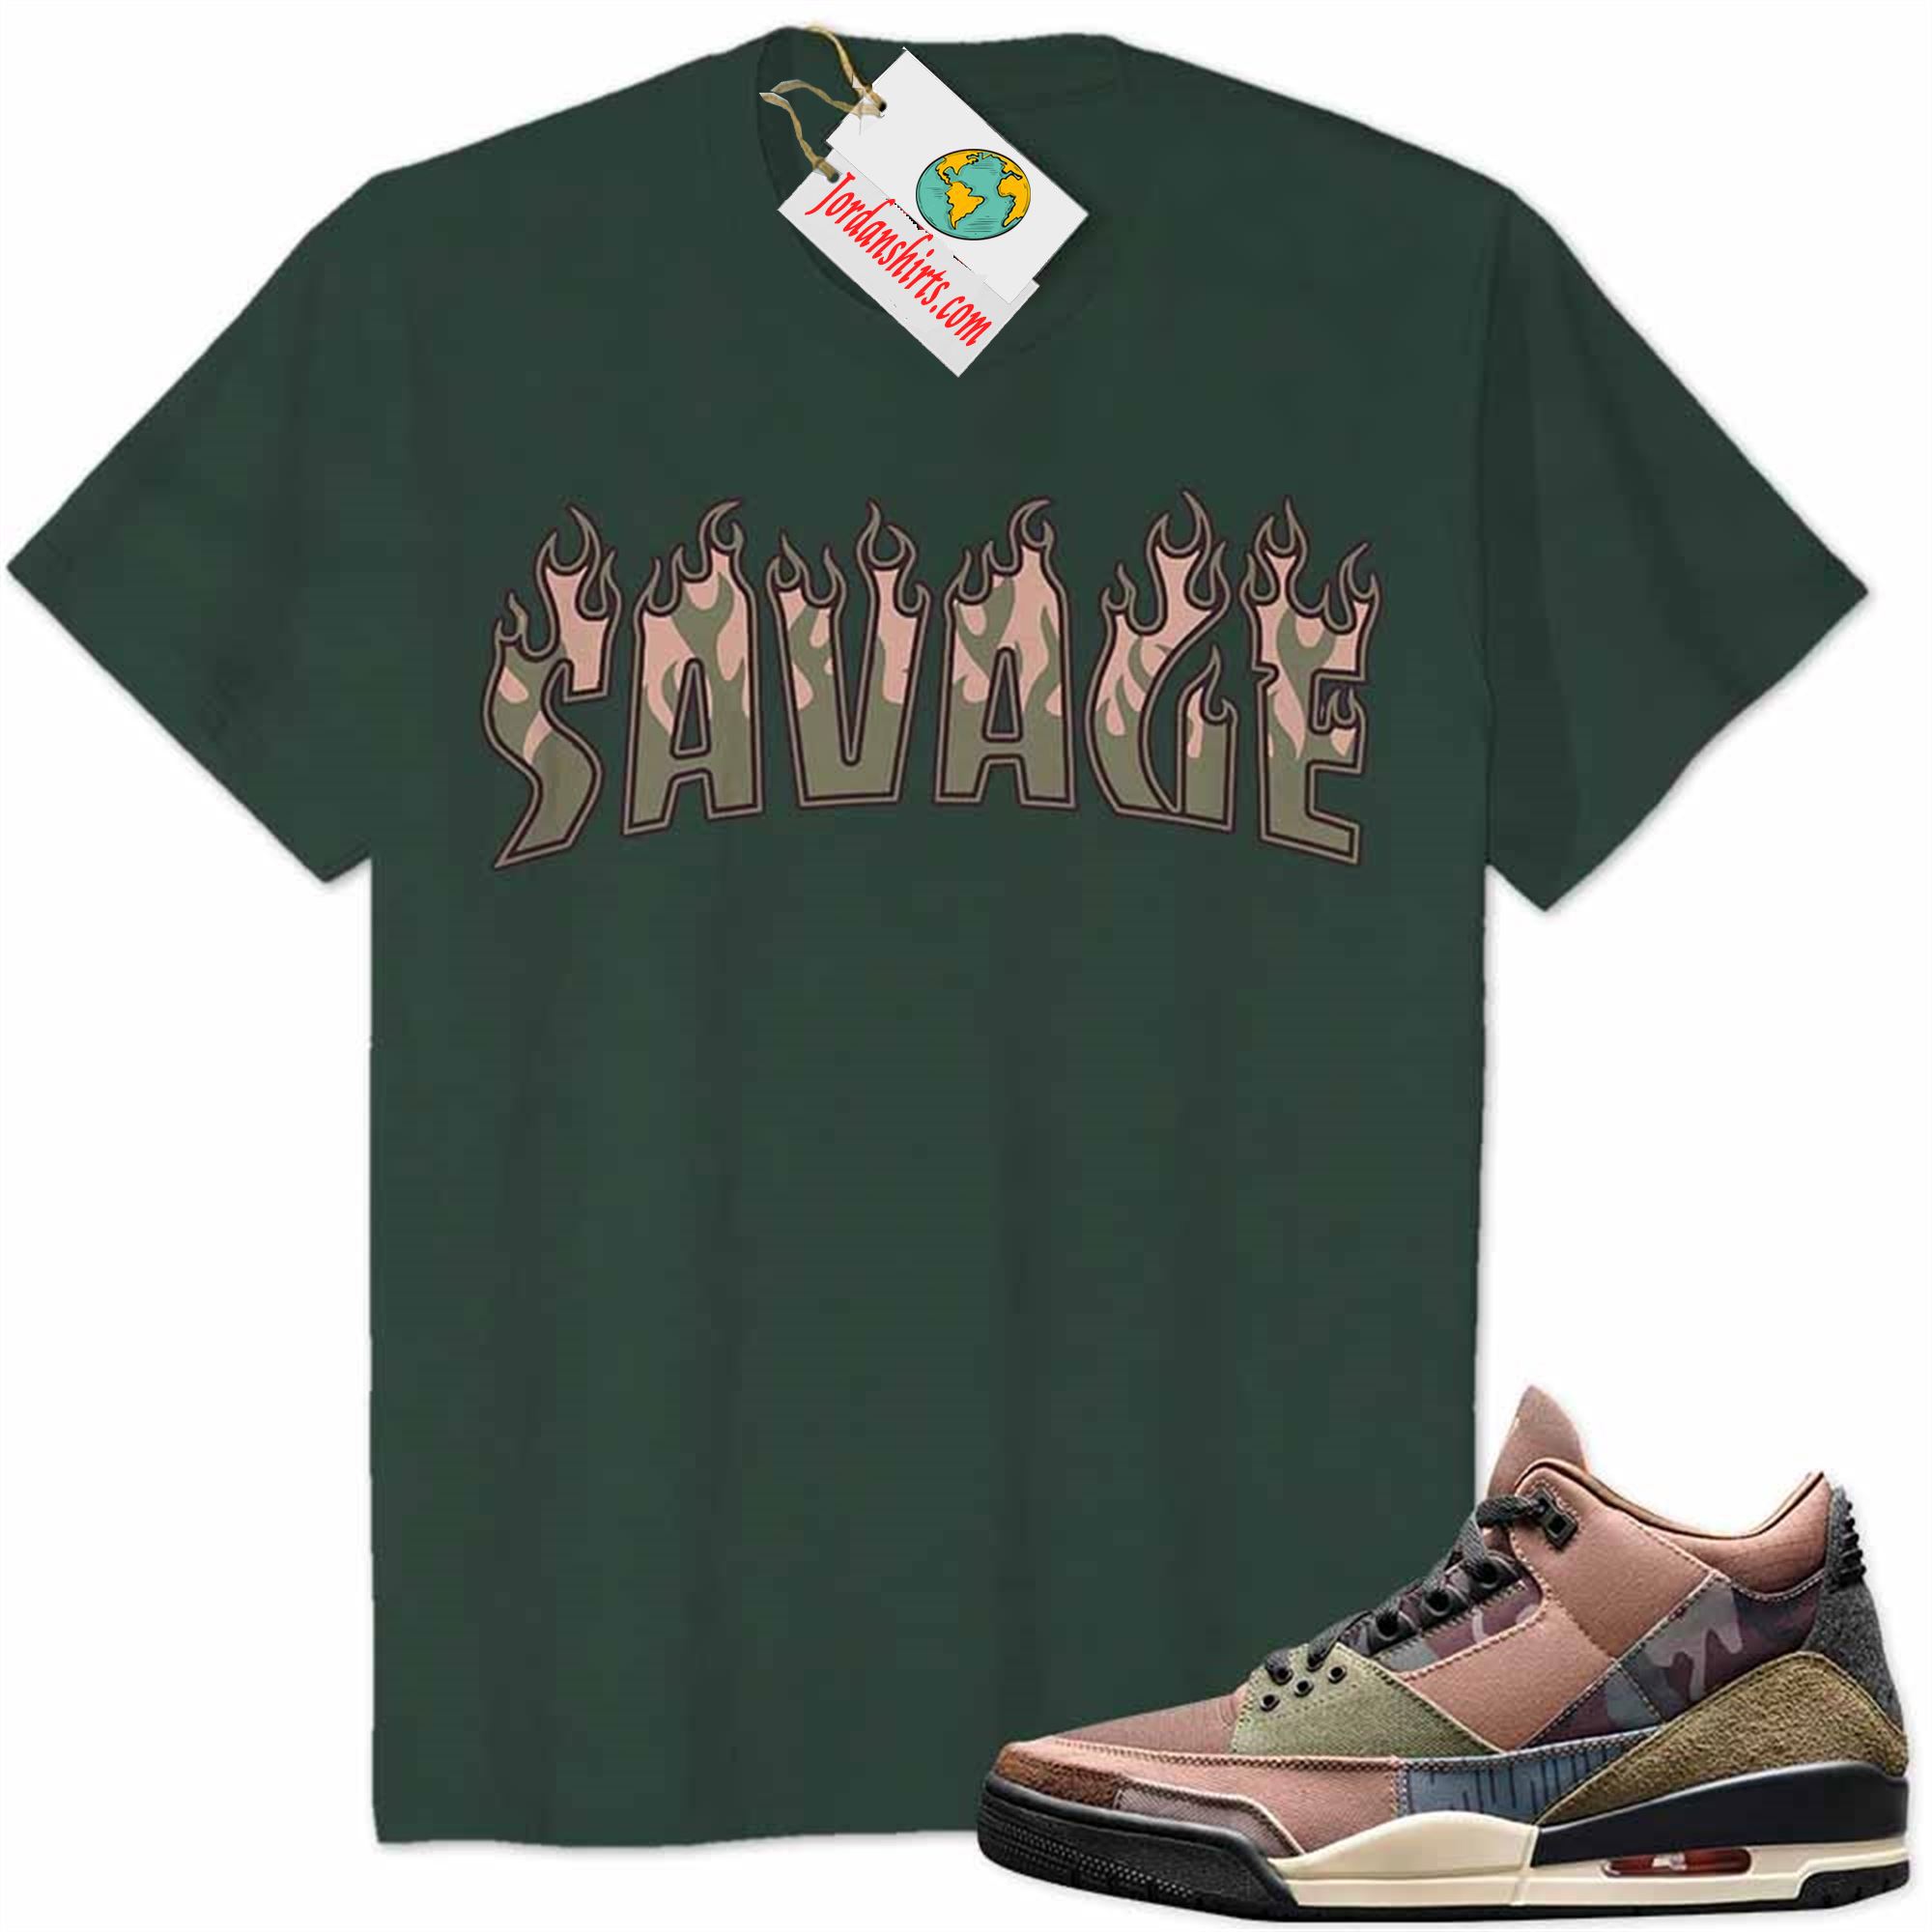 Jordan 3 Shirt, Savage Fire Style Forest Air Jordan 3 Patchwork 3s Full Size Up To 5xl